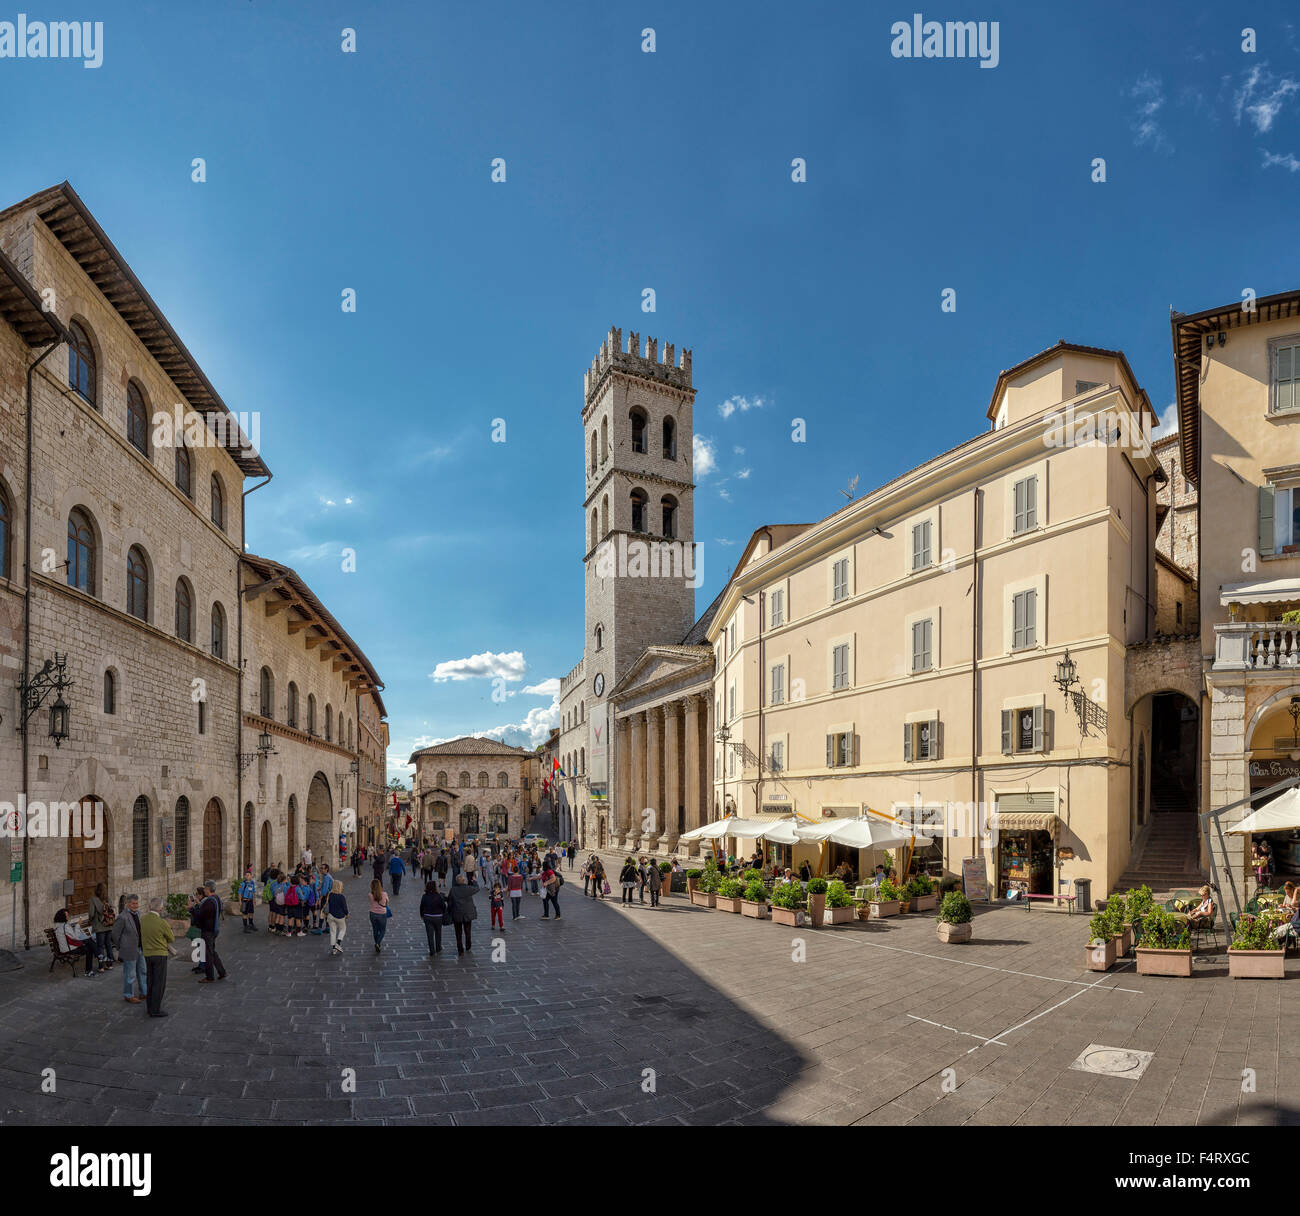 Italy, Europe, Assisi, Umbria, Piazza del Comune, village, spring, people, Stock Photo